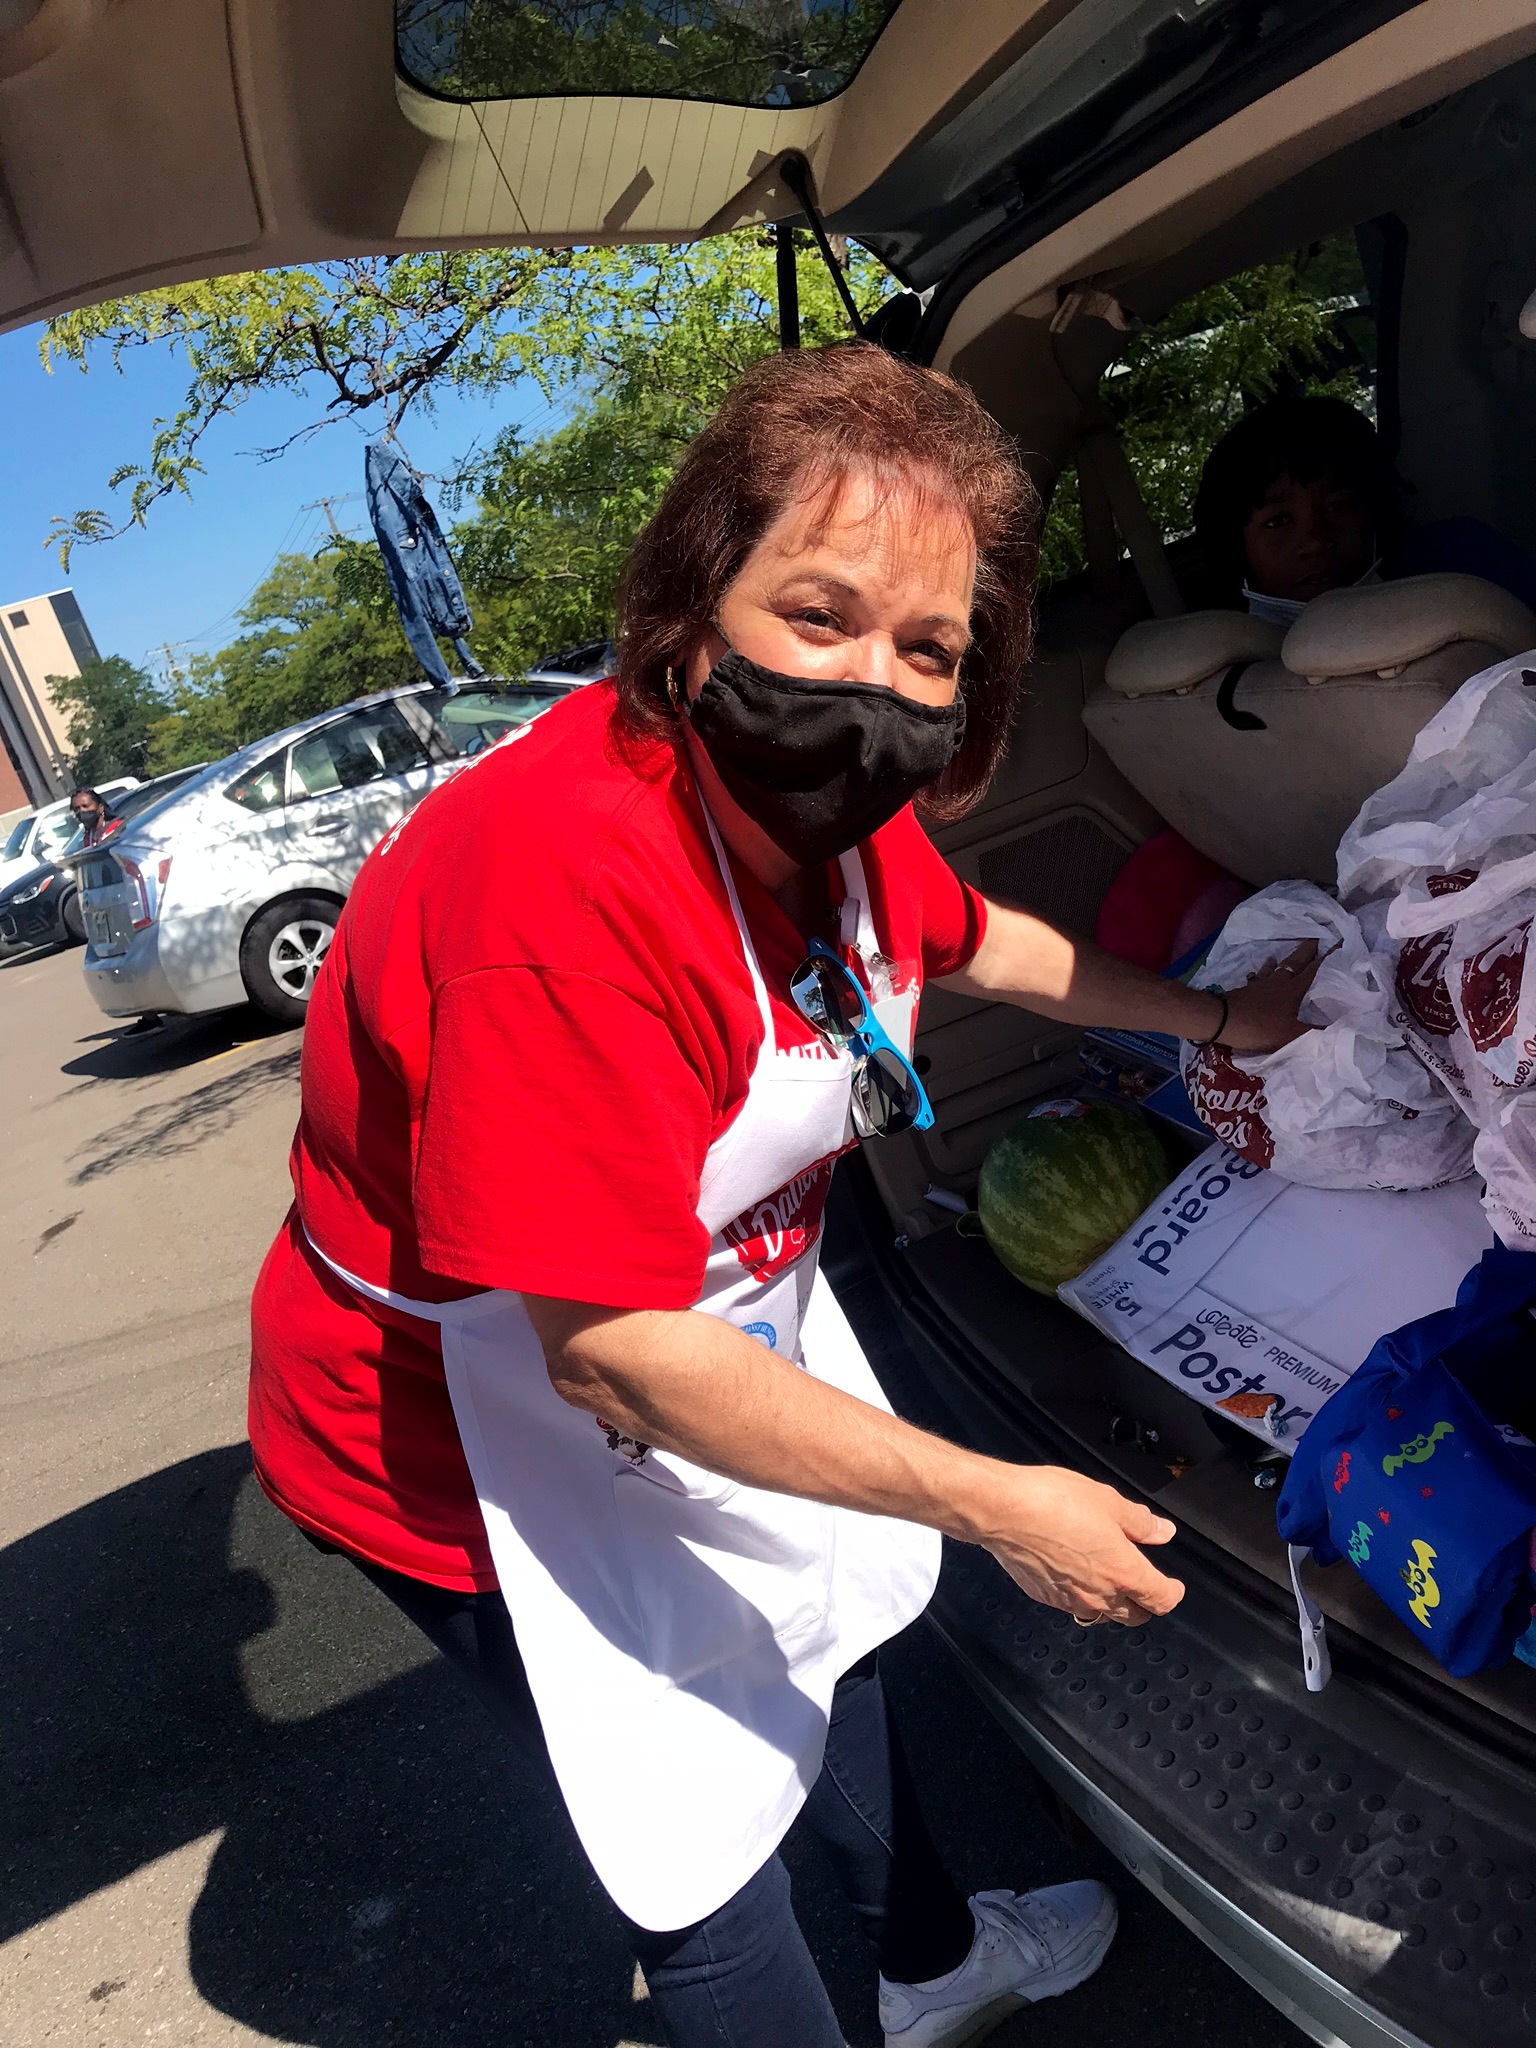 one woman volunteer for Higher Hopes putting food in trunk of car